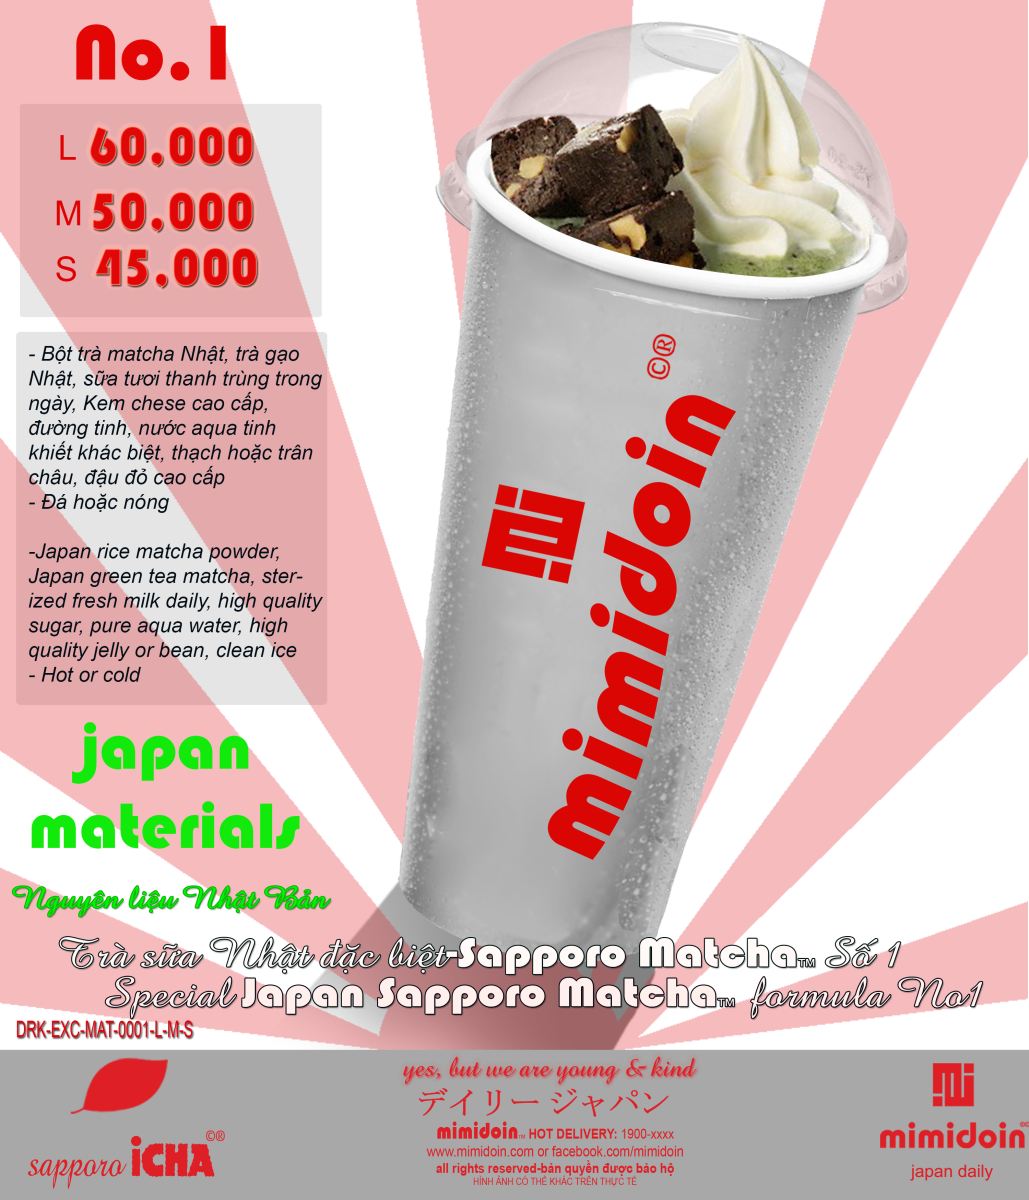 DRK-EXC-MAT-0001-L-Sapporo Matcha-Special-Large